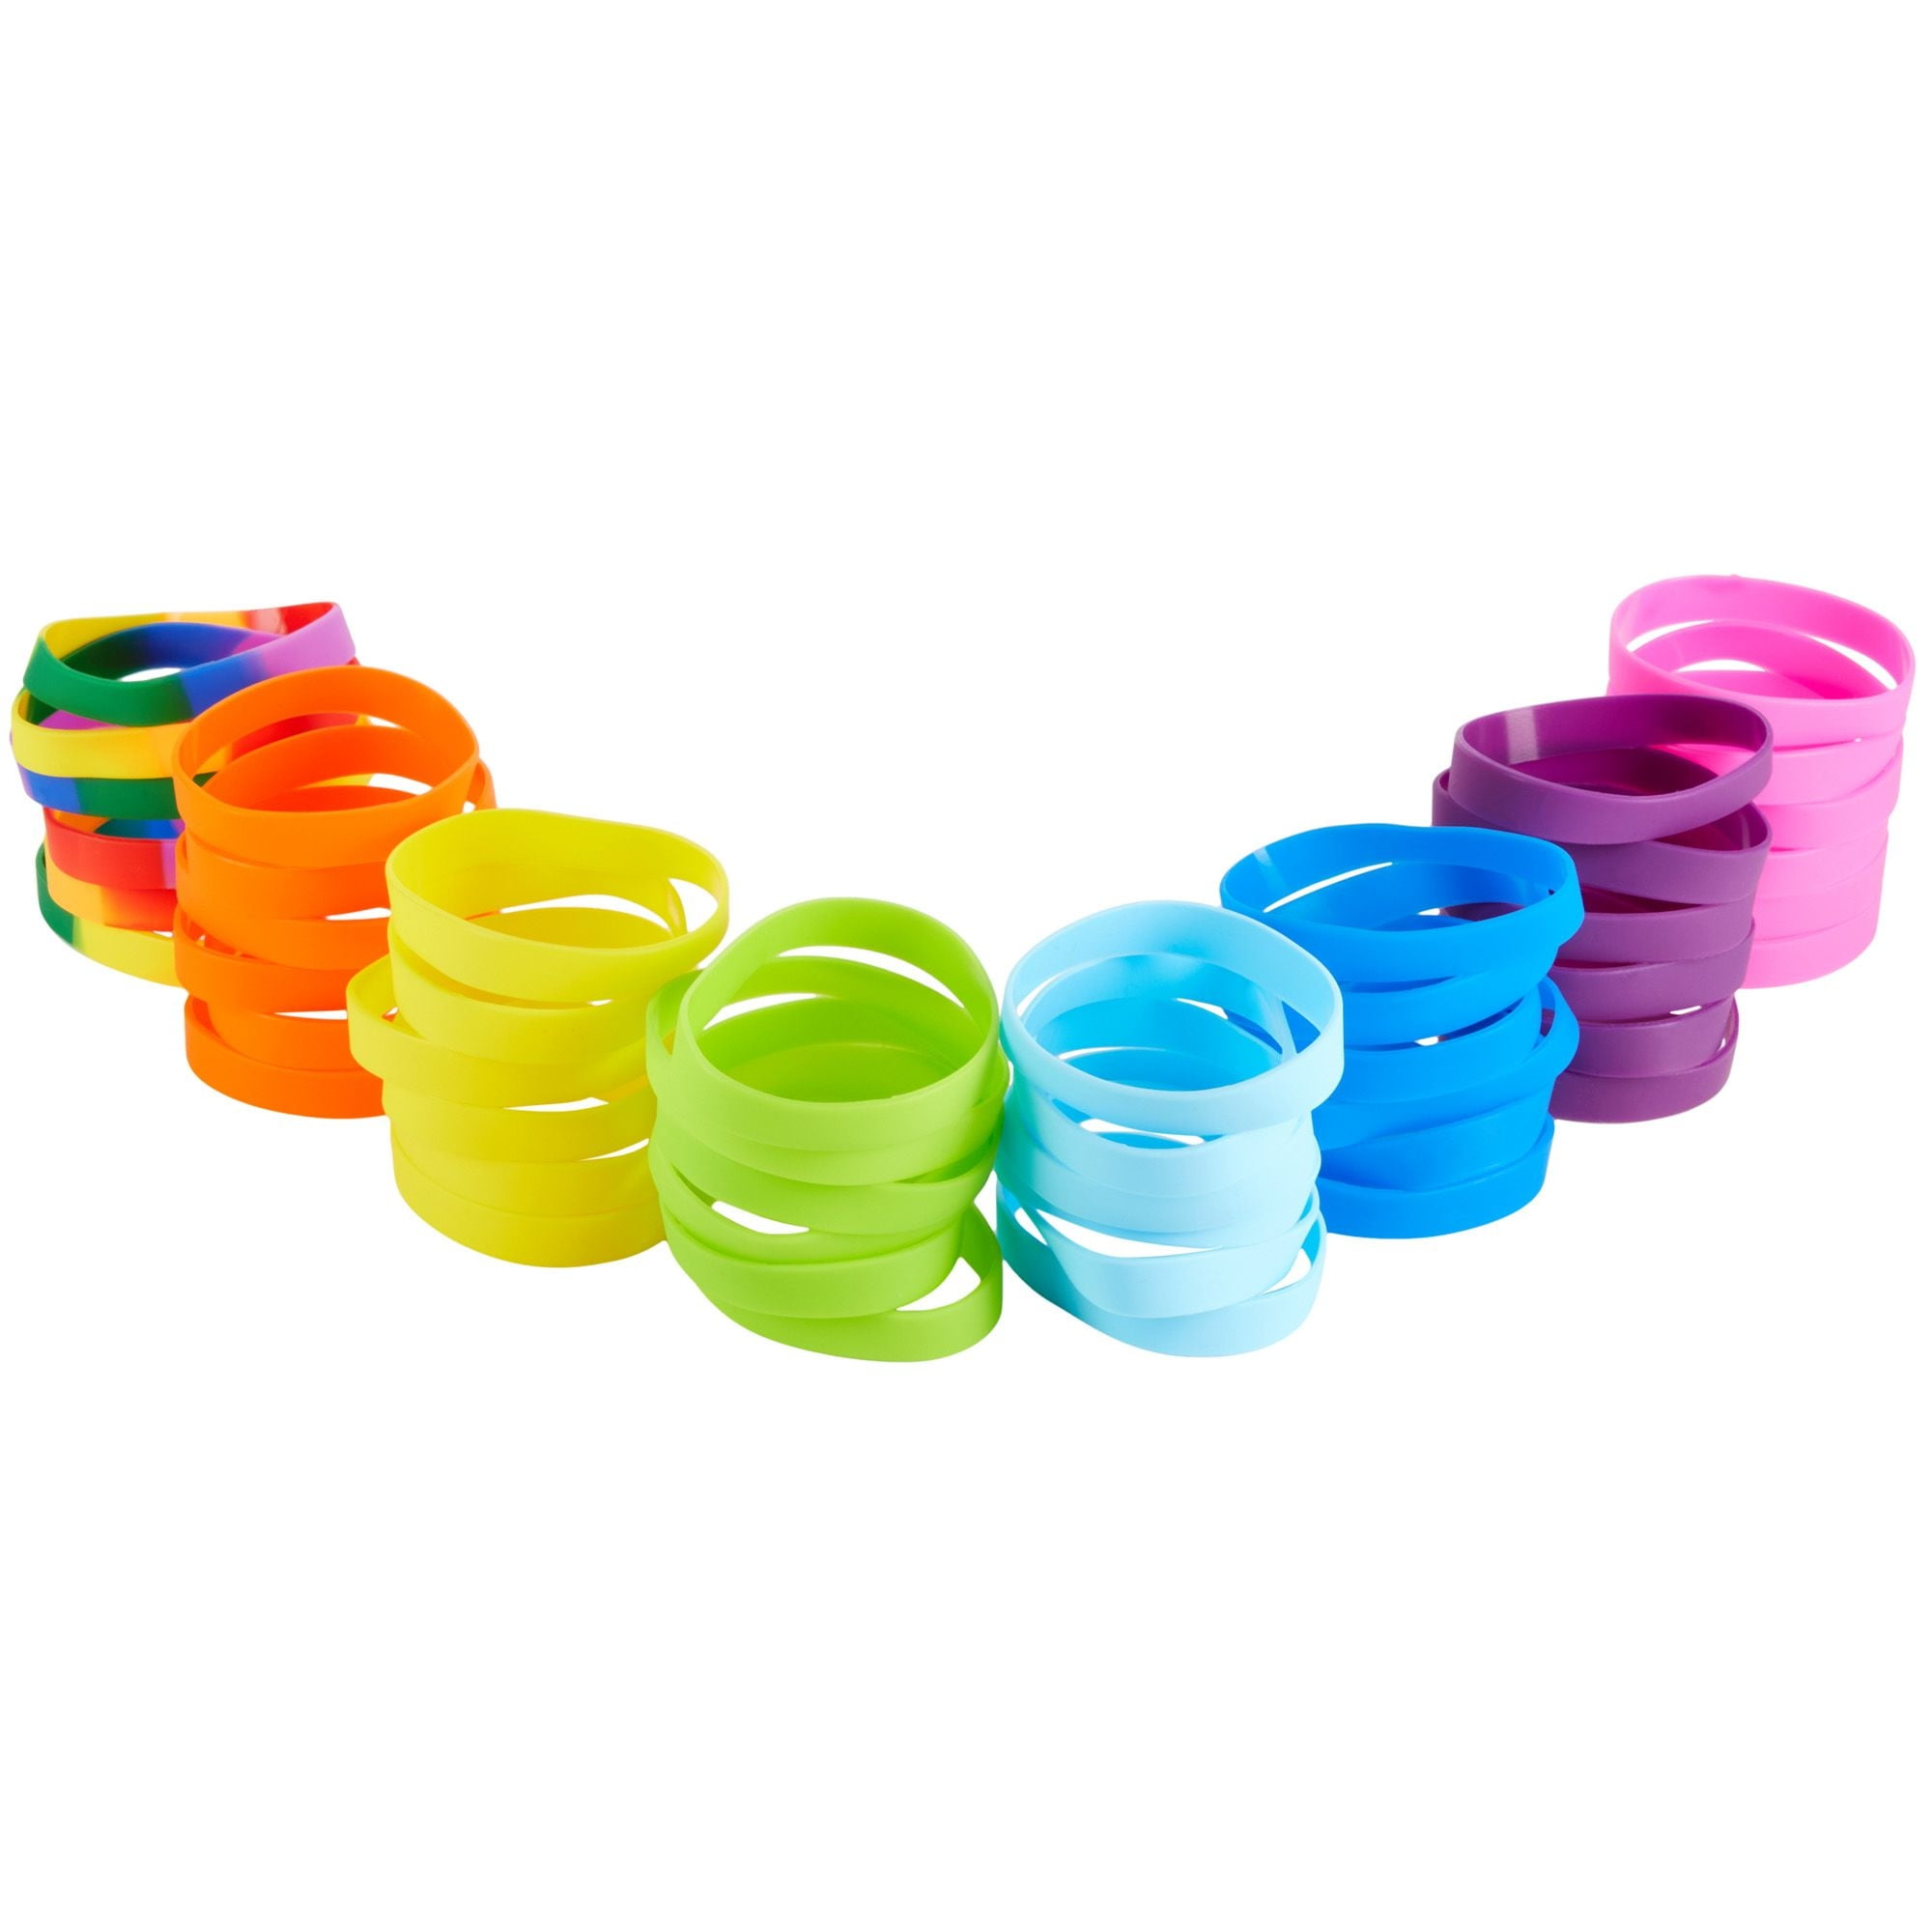 AVEC JOIE RIP Memorial Bracelet Basketball Silicone Bracelets Rubber  Wristbands for Teens and Adults 6 PCS in Six Colors